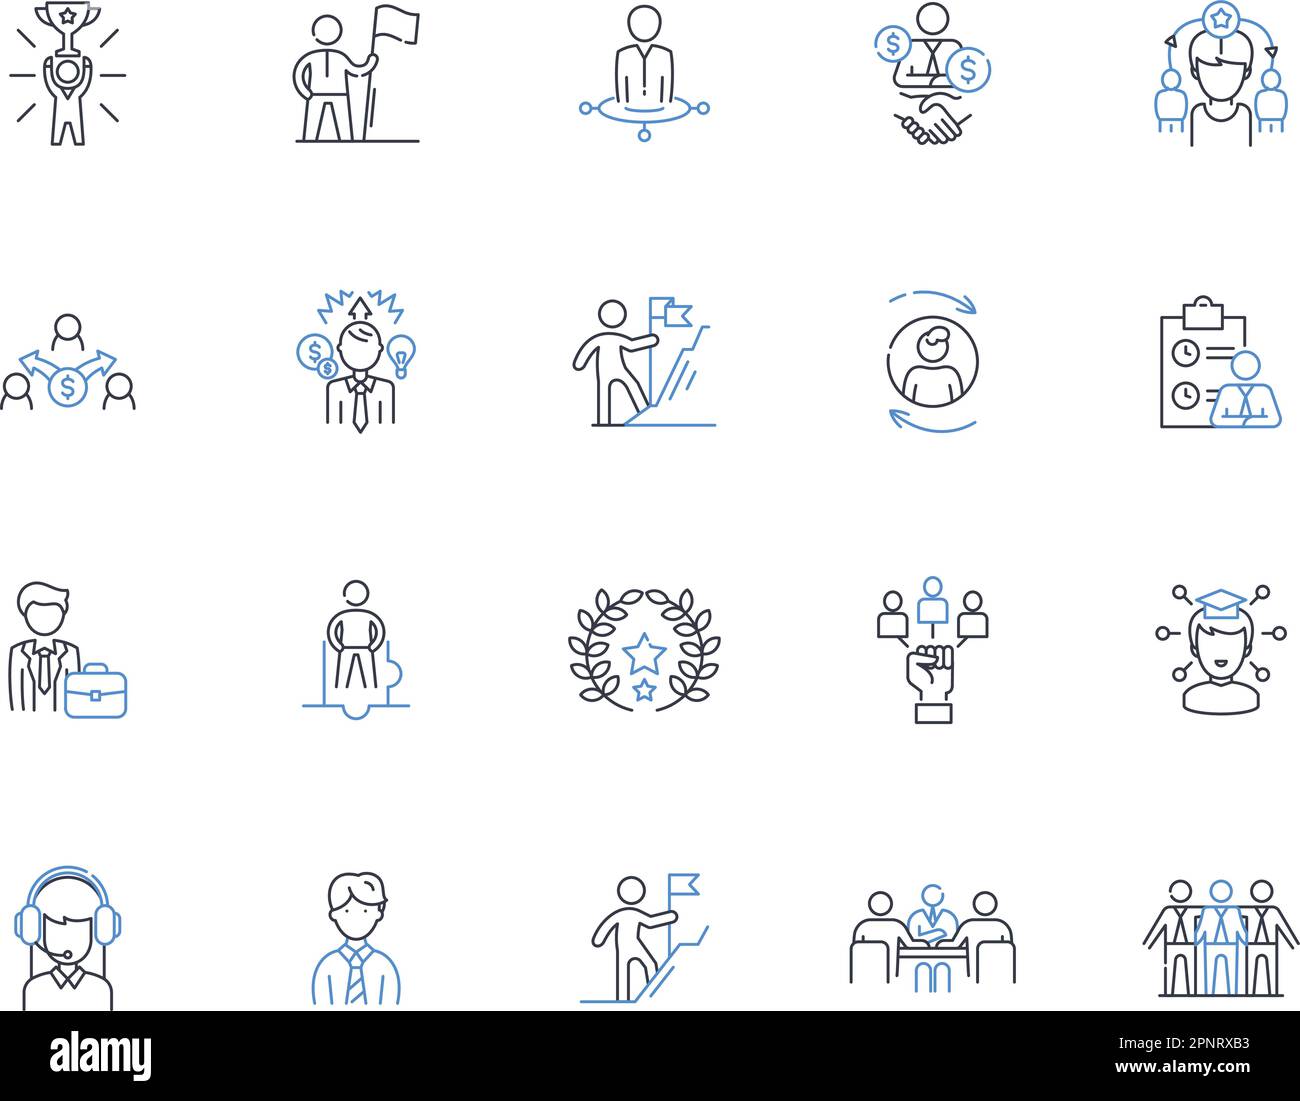 Syndicate line icons collection. Power, Influence, Nerk, Connections, Collaboration, Organization, Control vector and linear illustration. Authority Stock Vector